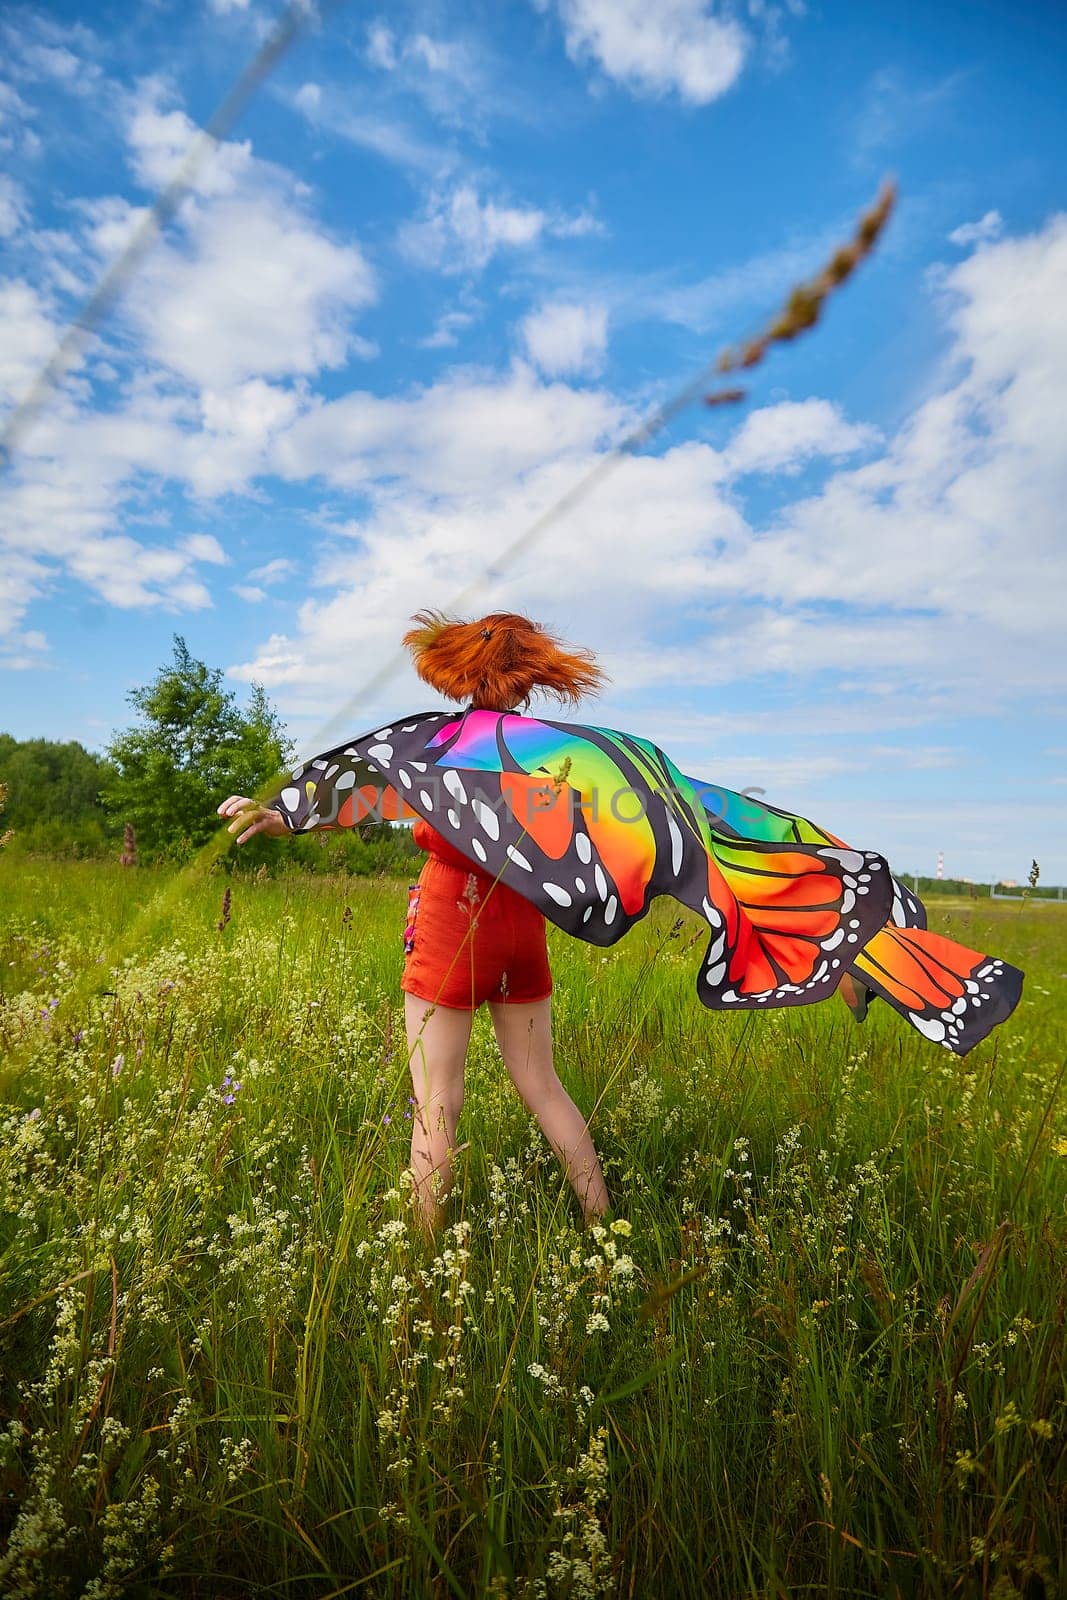 Adult girl with red hair and butterfly wings having fun and joy in meadow or field with grass, flowers on summer sunny day by keleny